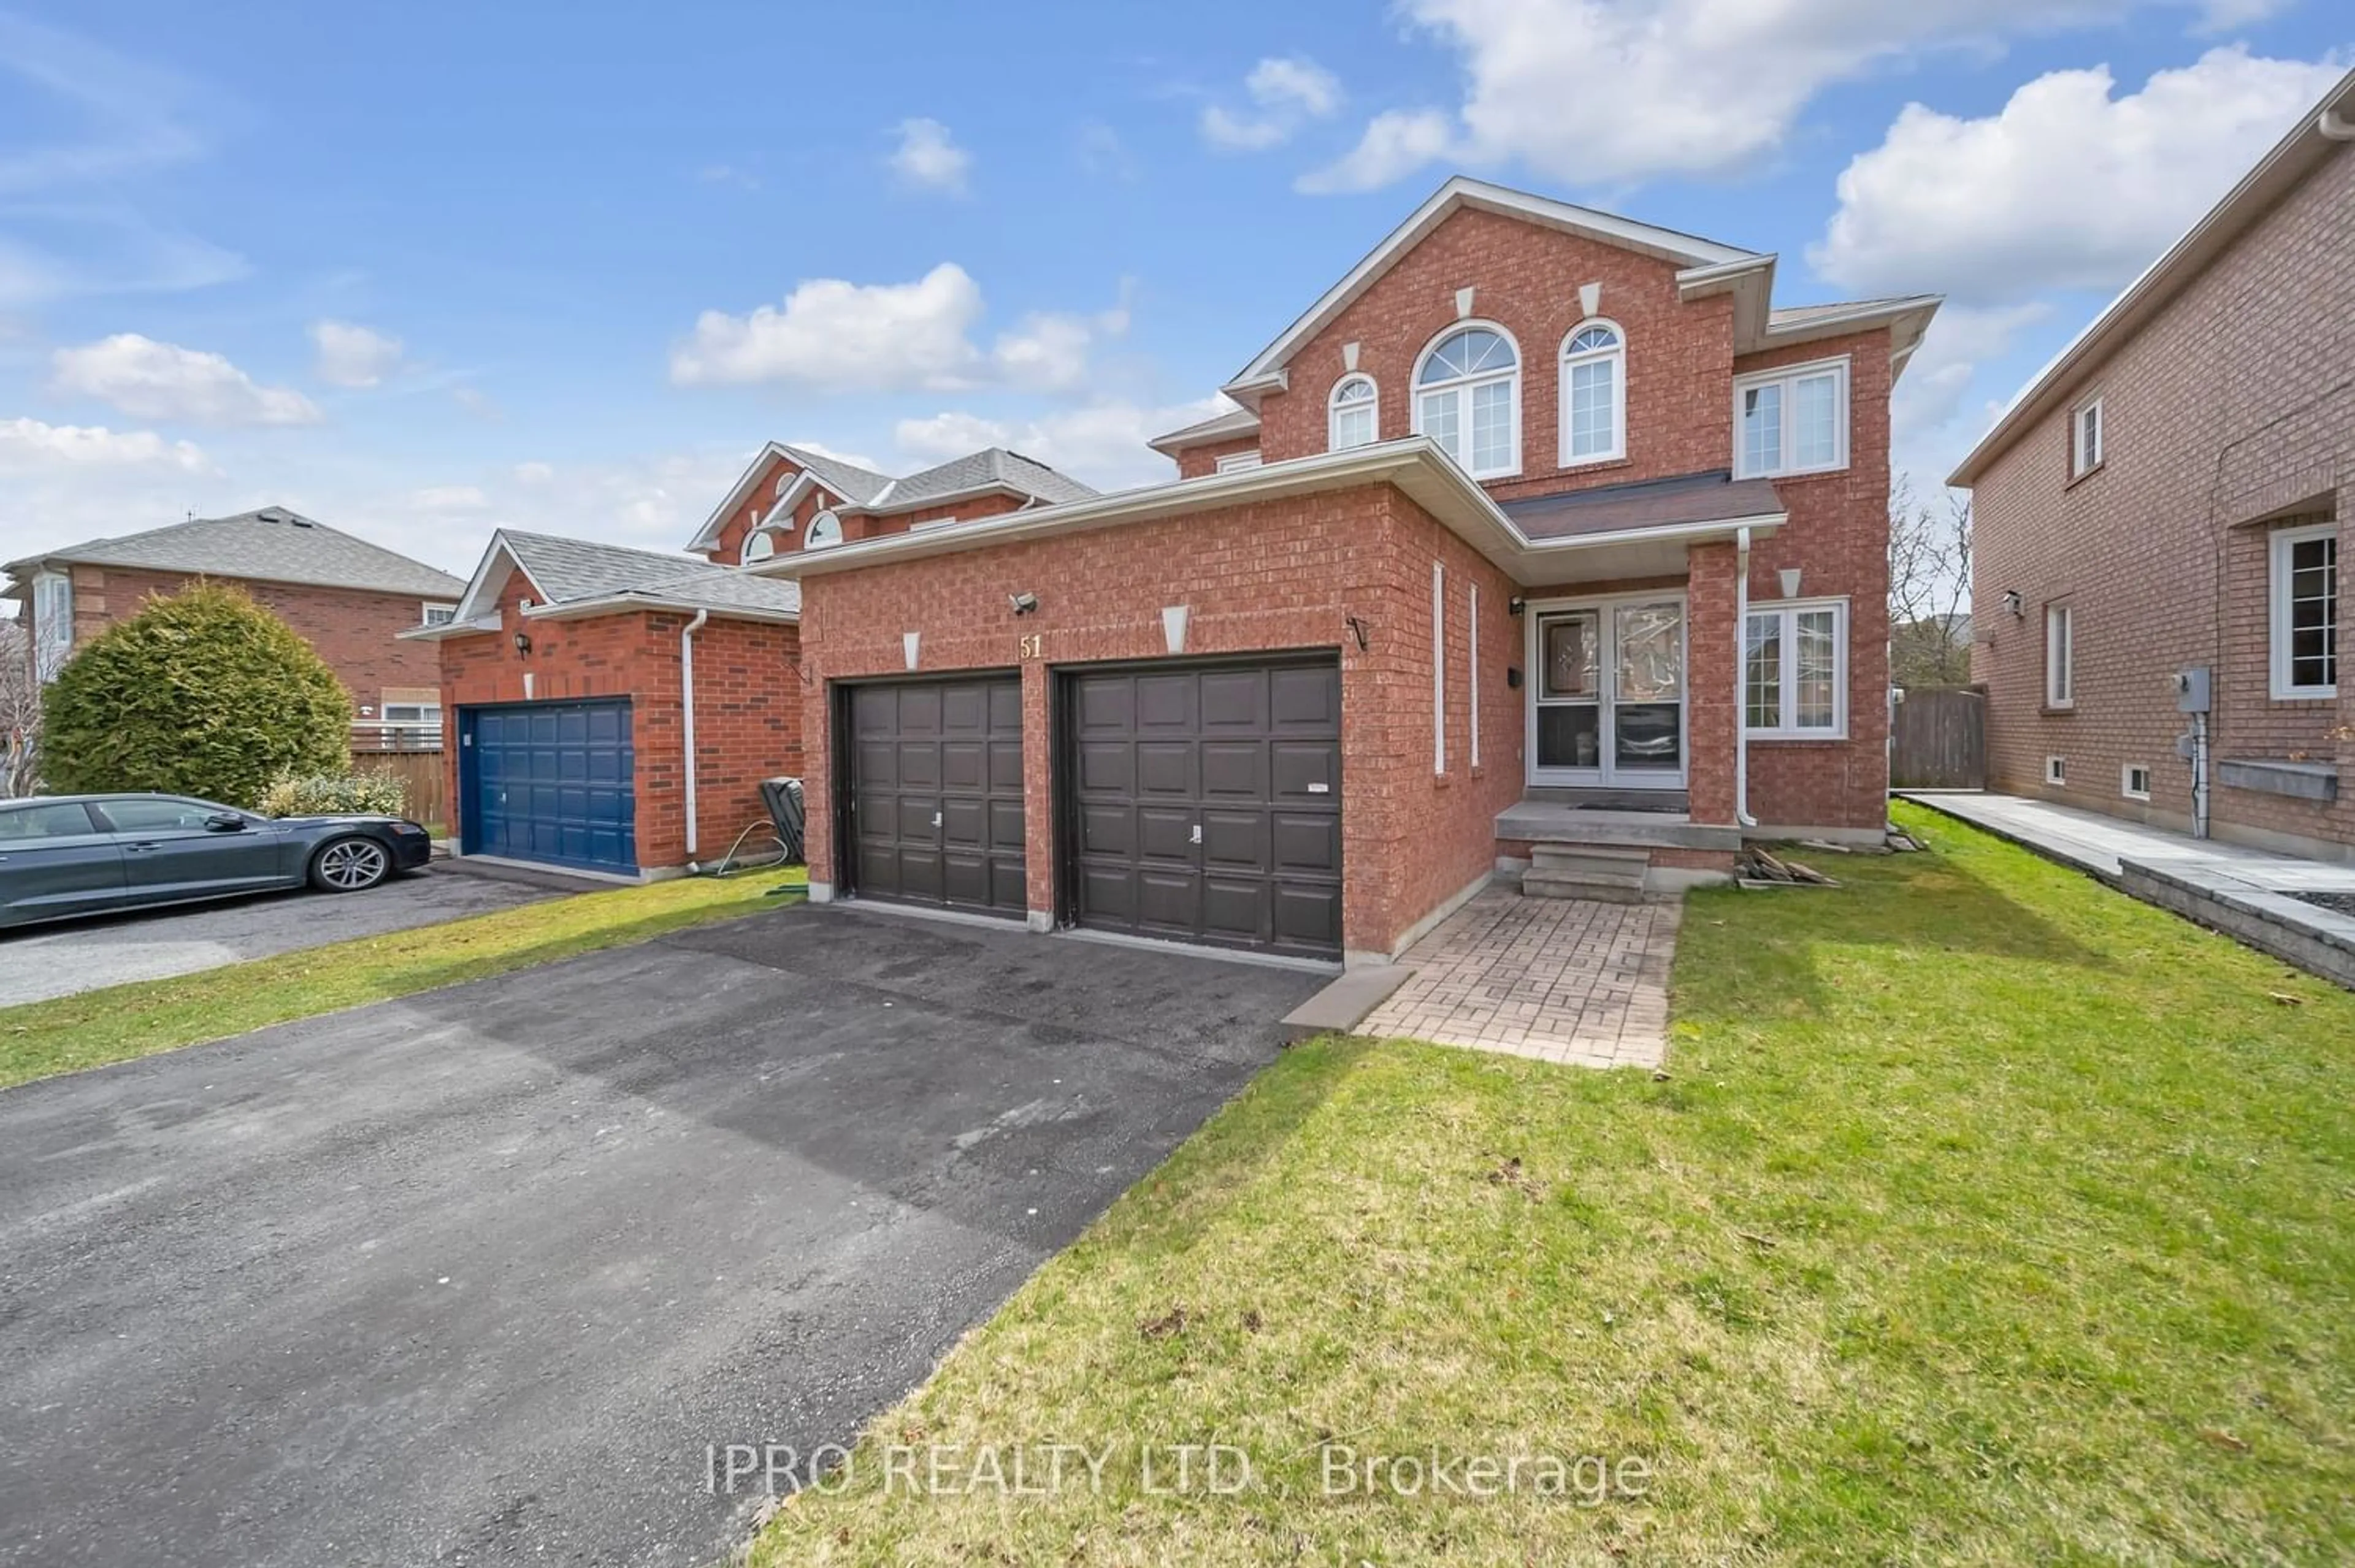 Home with brick exterior material for 51 Tipton Cres, Ajax Ontario L1T 4A6